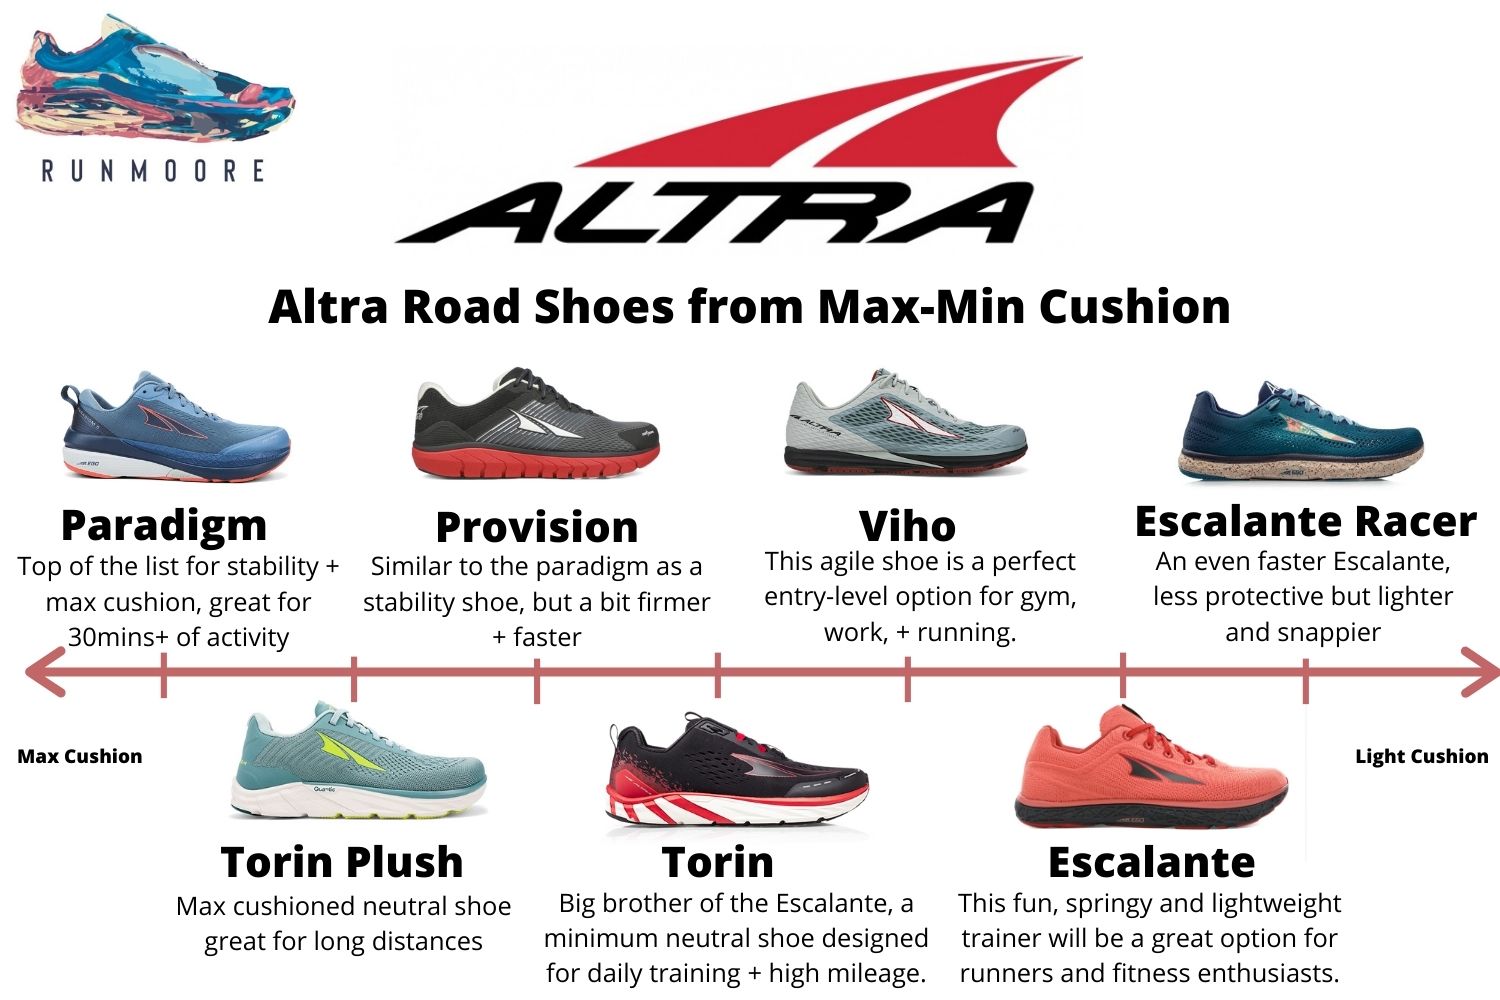 most cushioned altra shoe